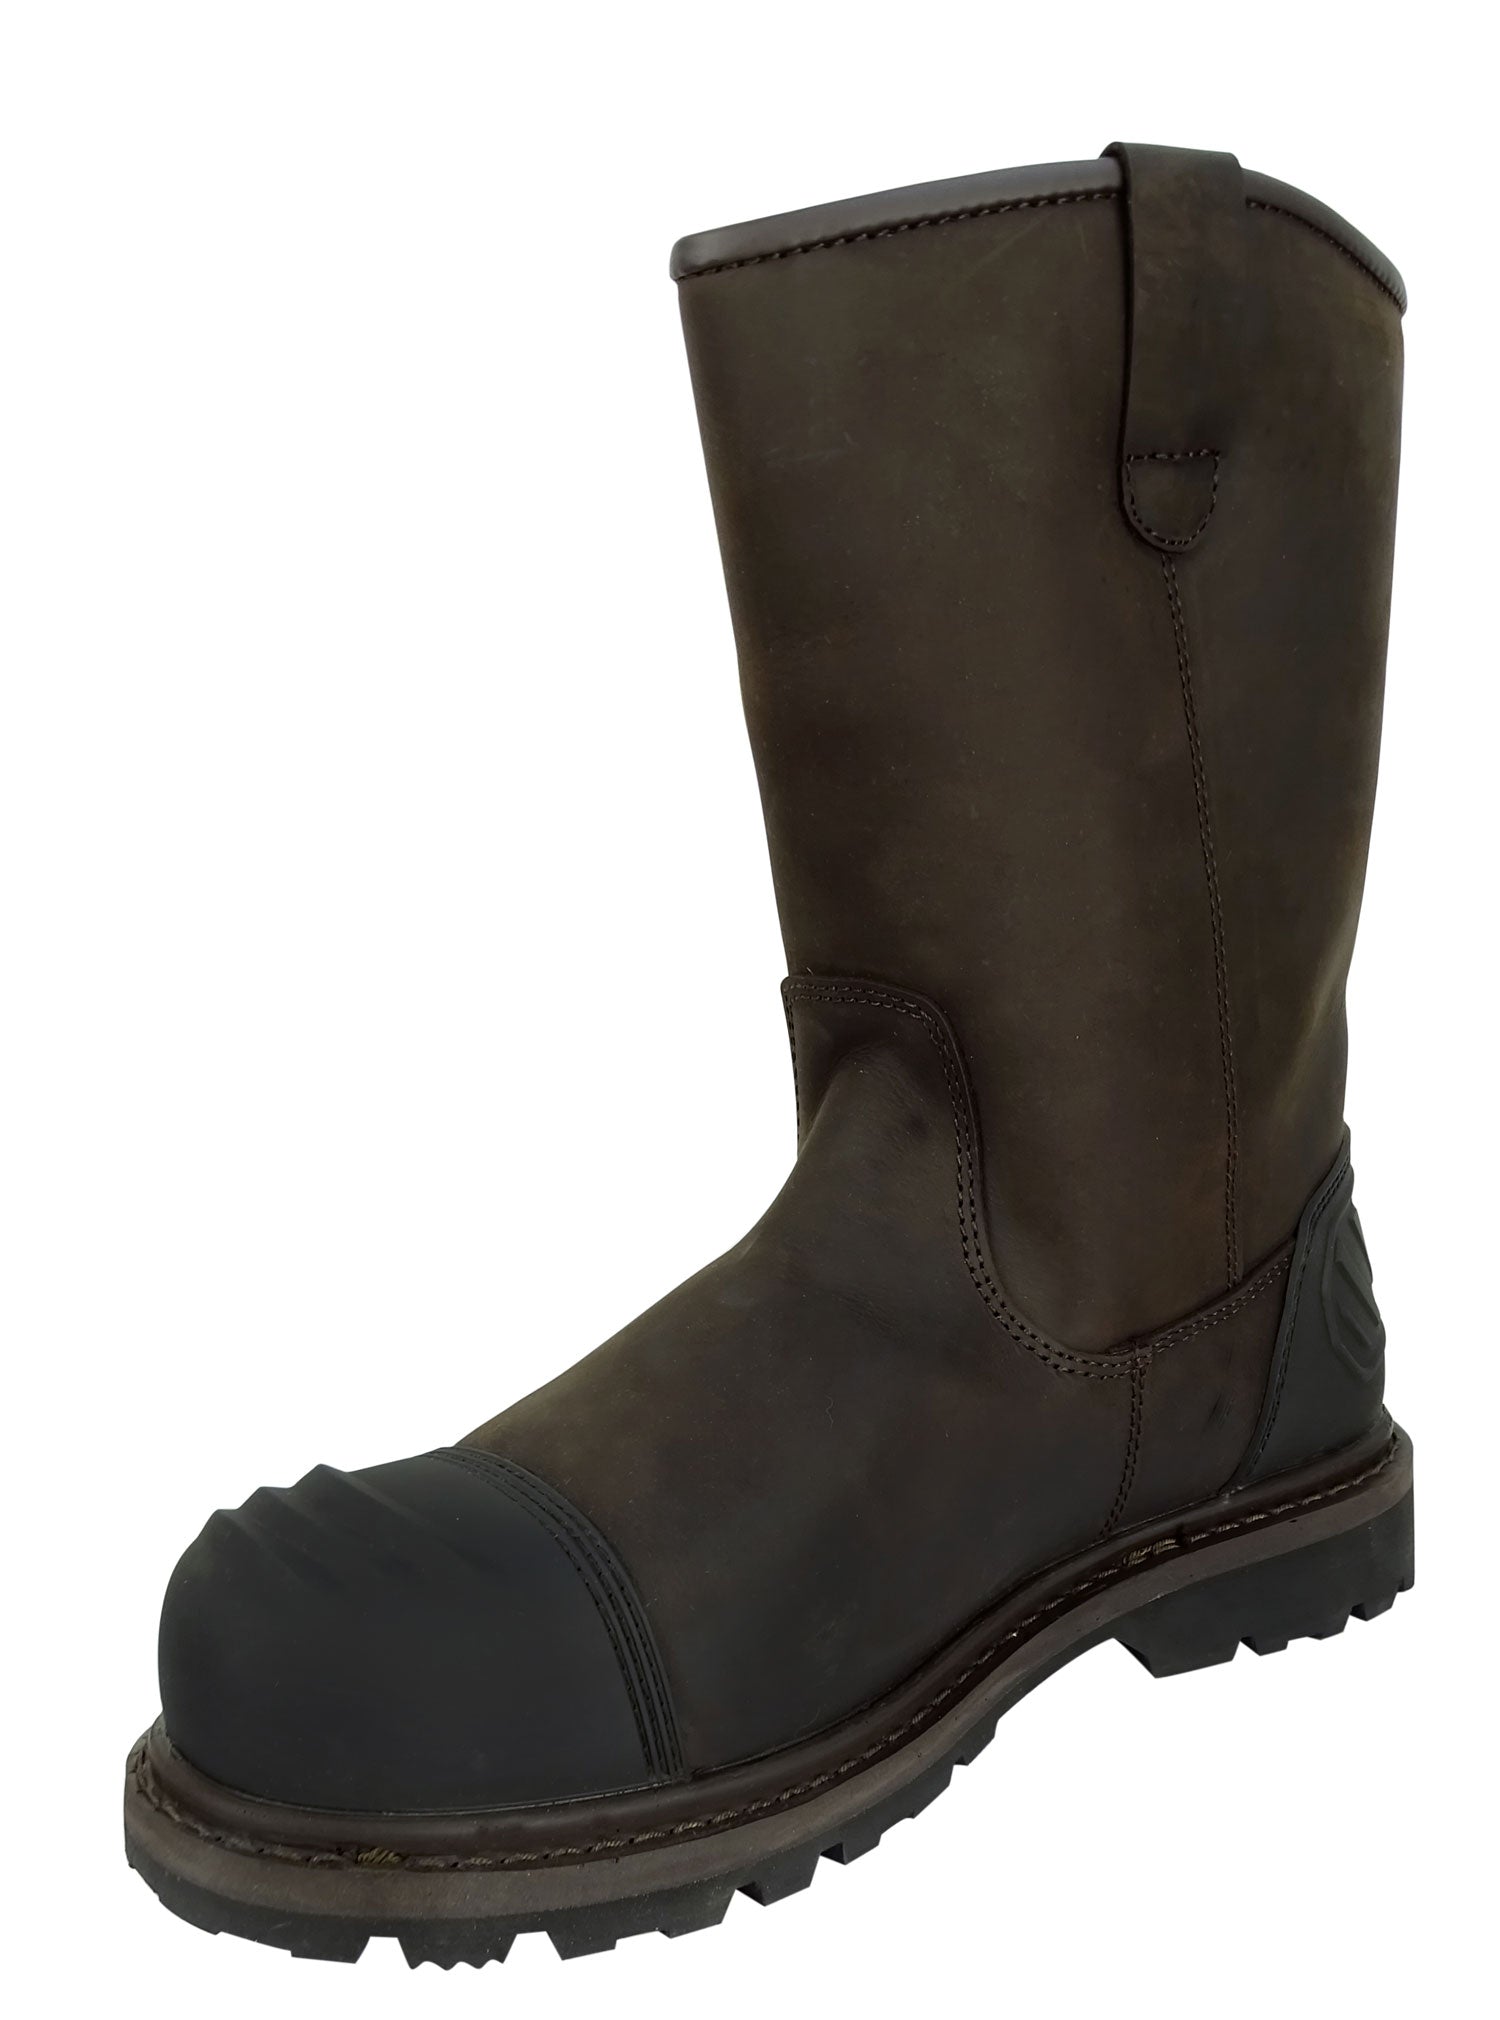 Dark Brown Hoggs of Fife Thor Safety Rigger Boots